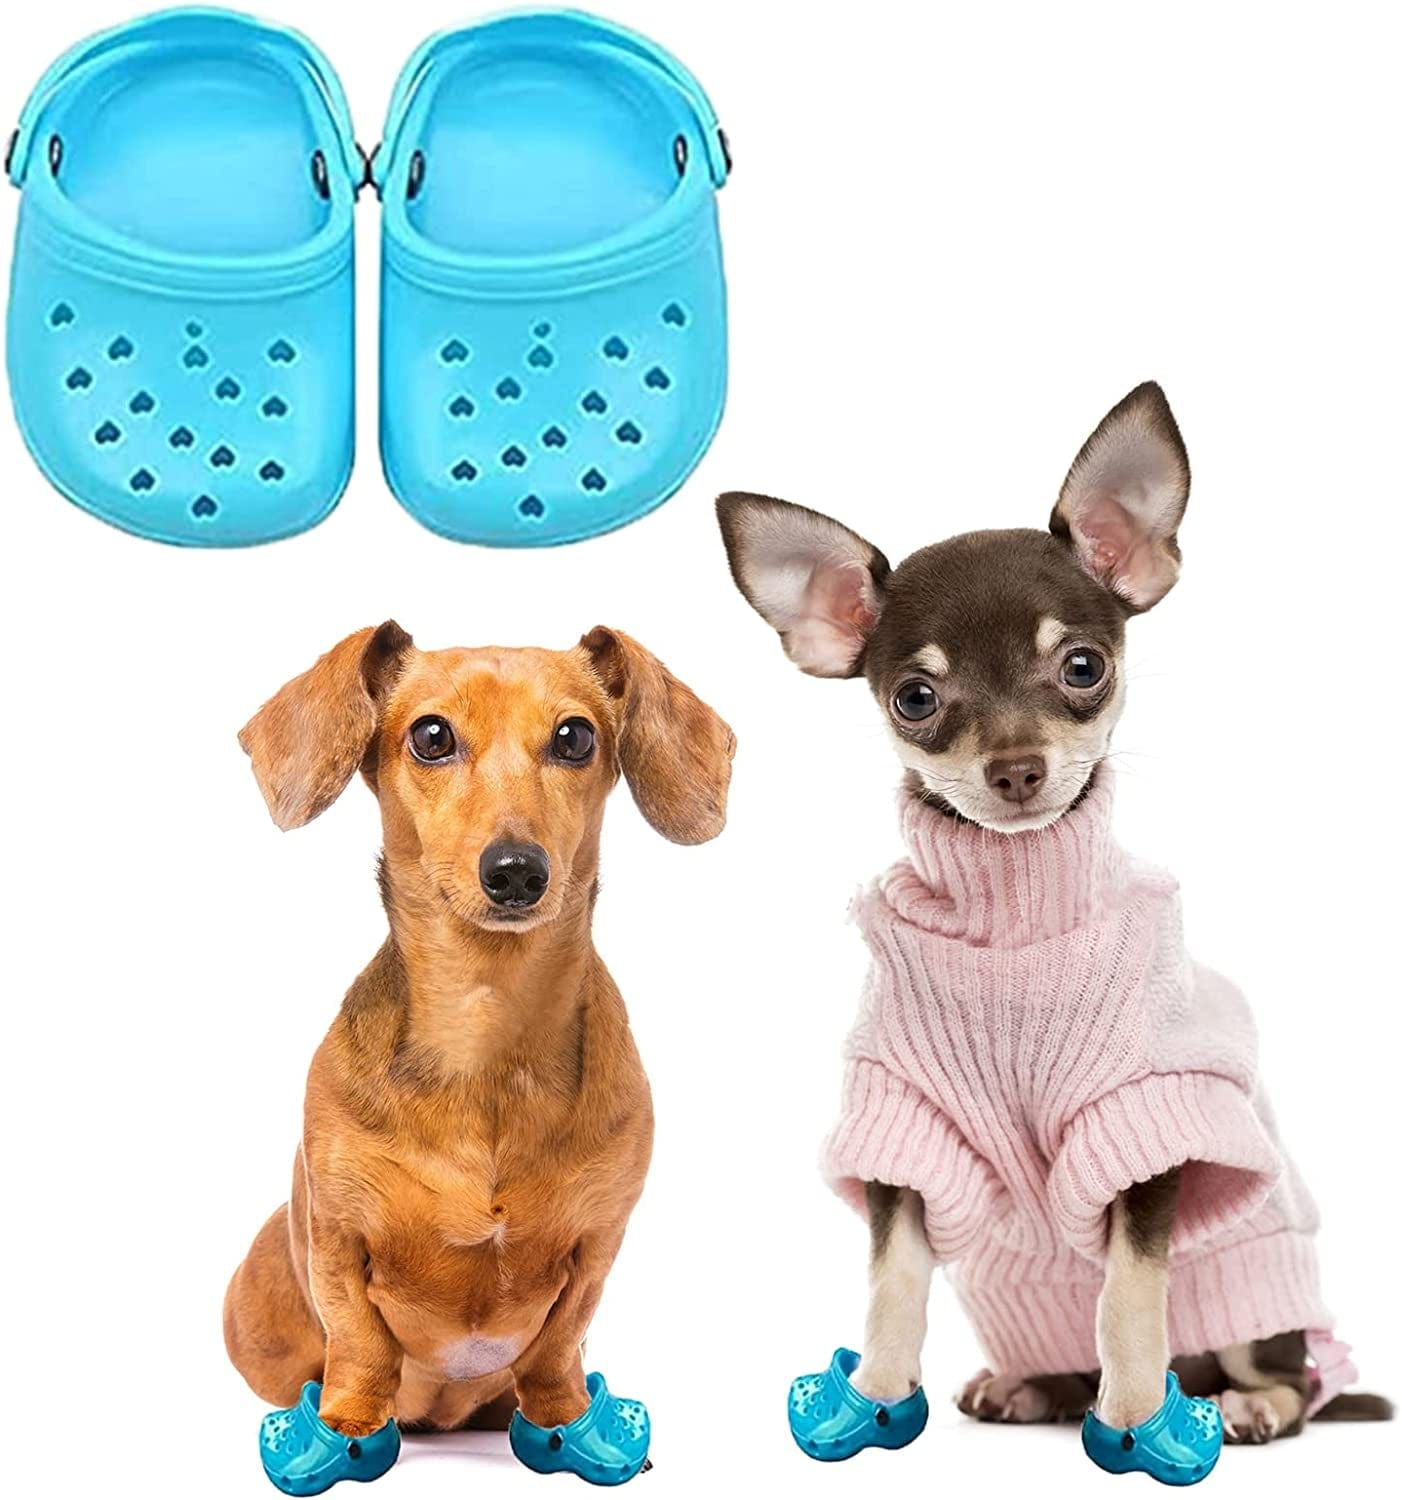 Pet Dog Croc,Summer Puppy Shoes,Candy Colors Sandals with Rugged Anti-Slip Sole, Breathable Comfortable Dog Shoes Gift for Pet Festival